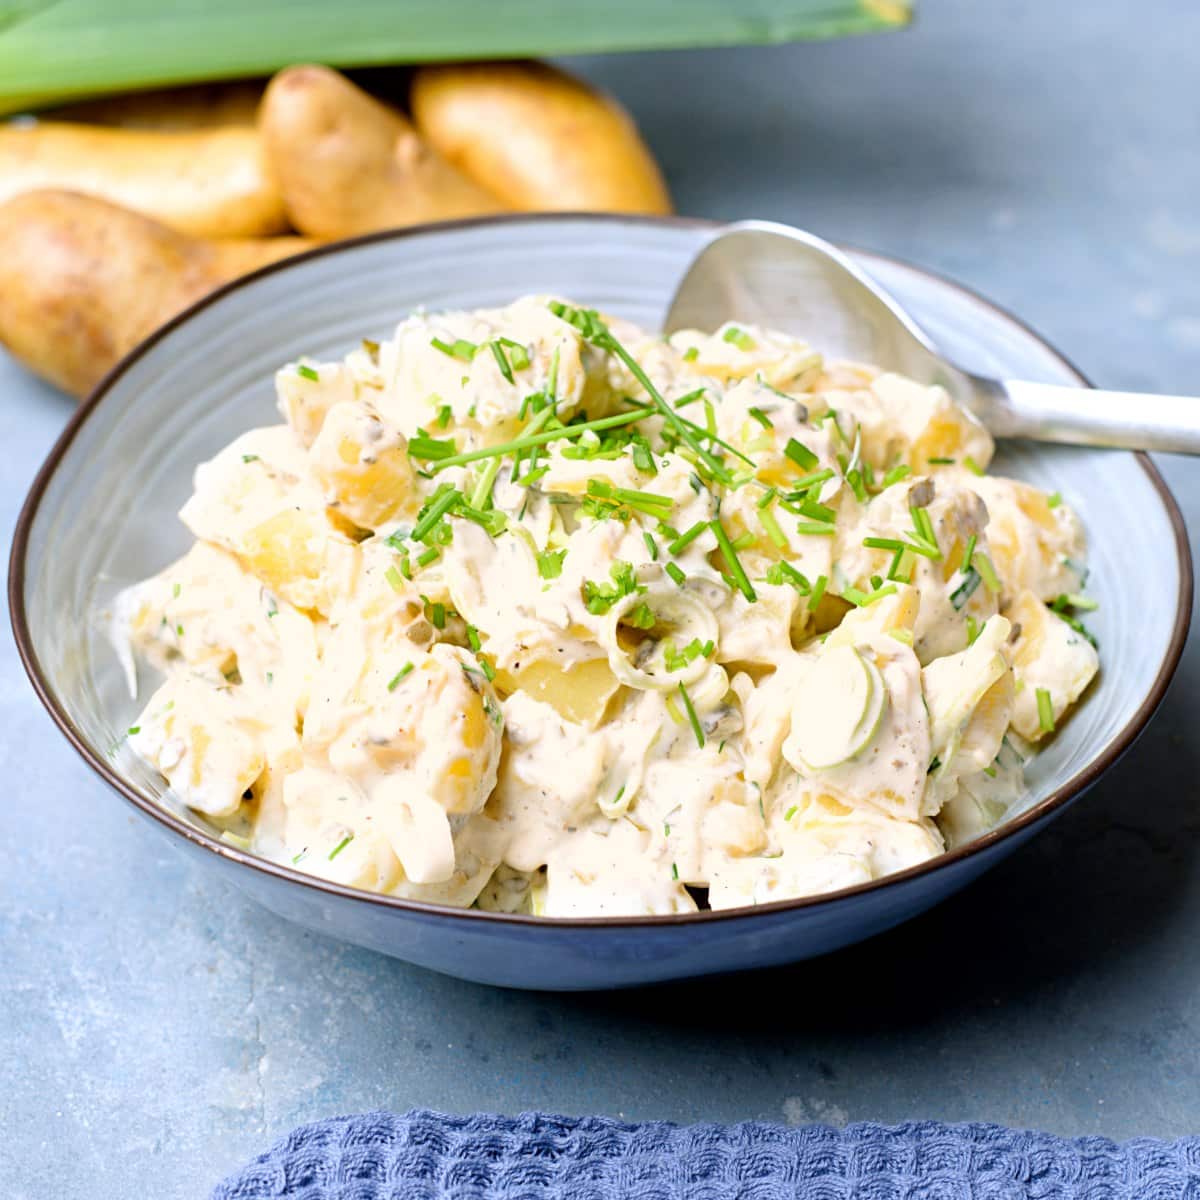 Potato salad with white dressing in blue bowl decorated with chives.